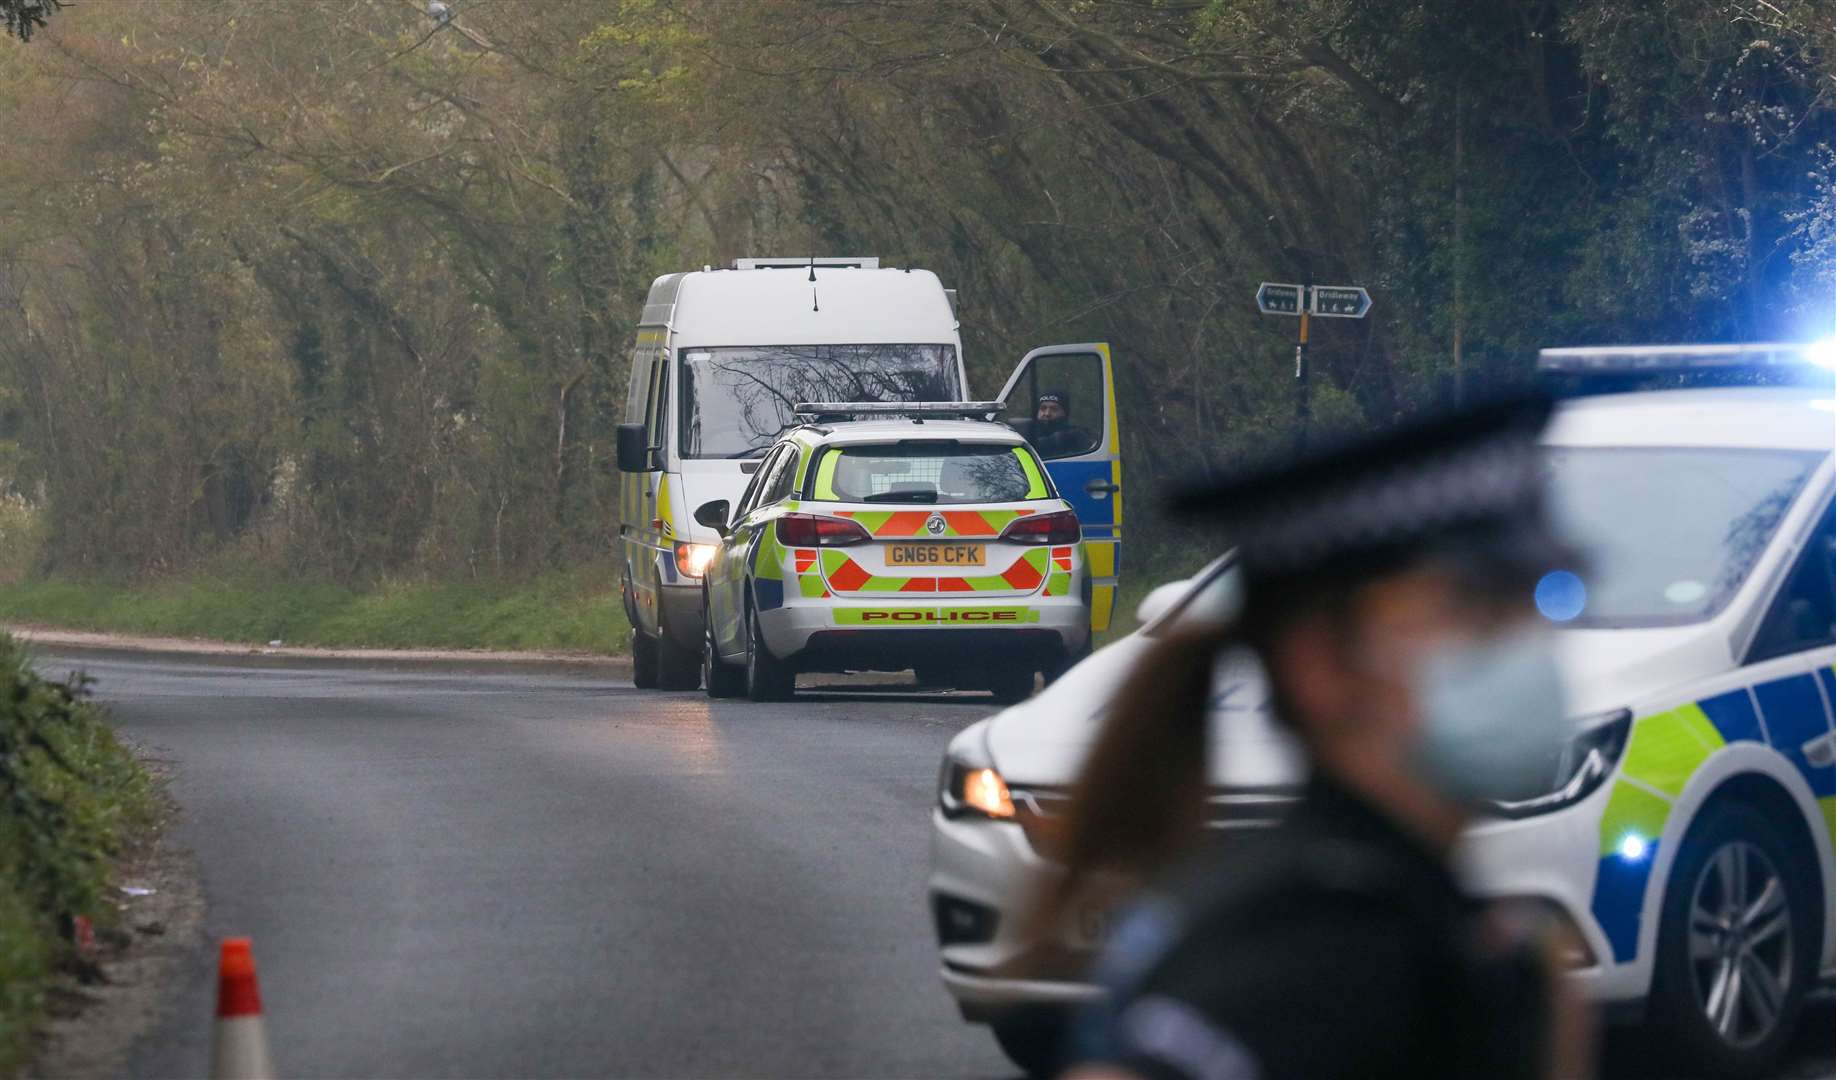 Police in Snowdown this morning Picture: UKNIP